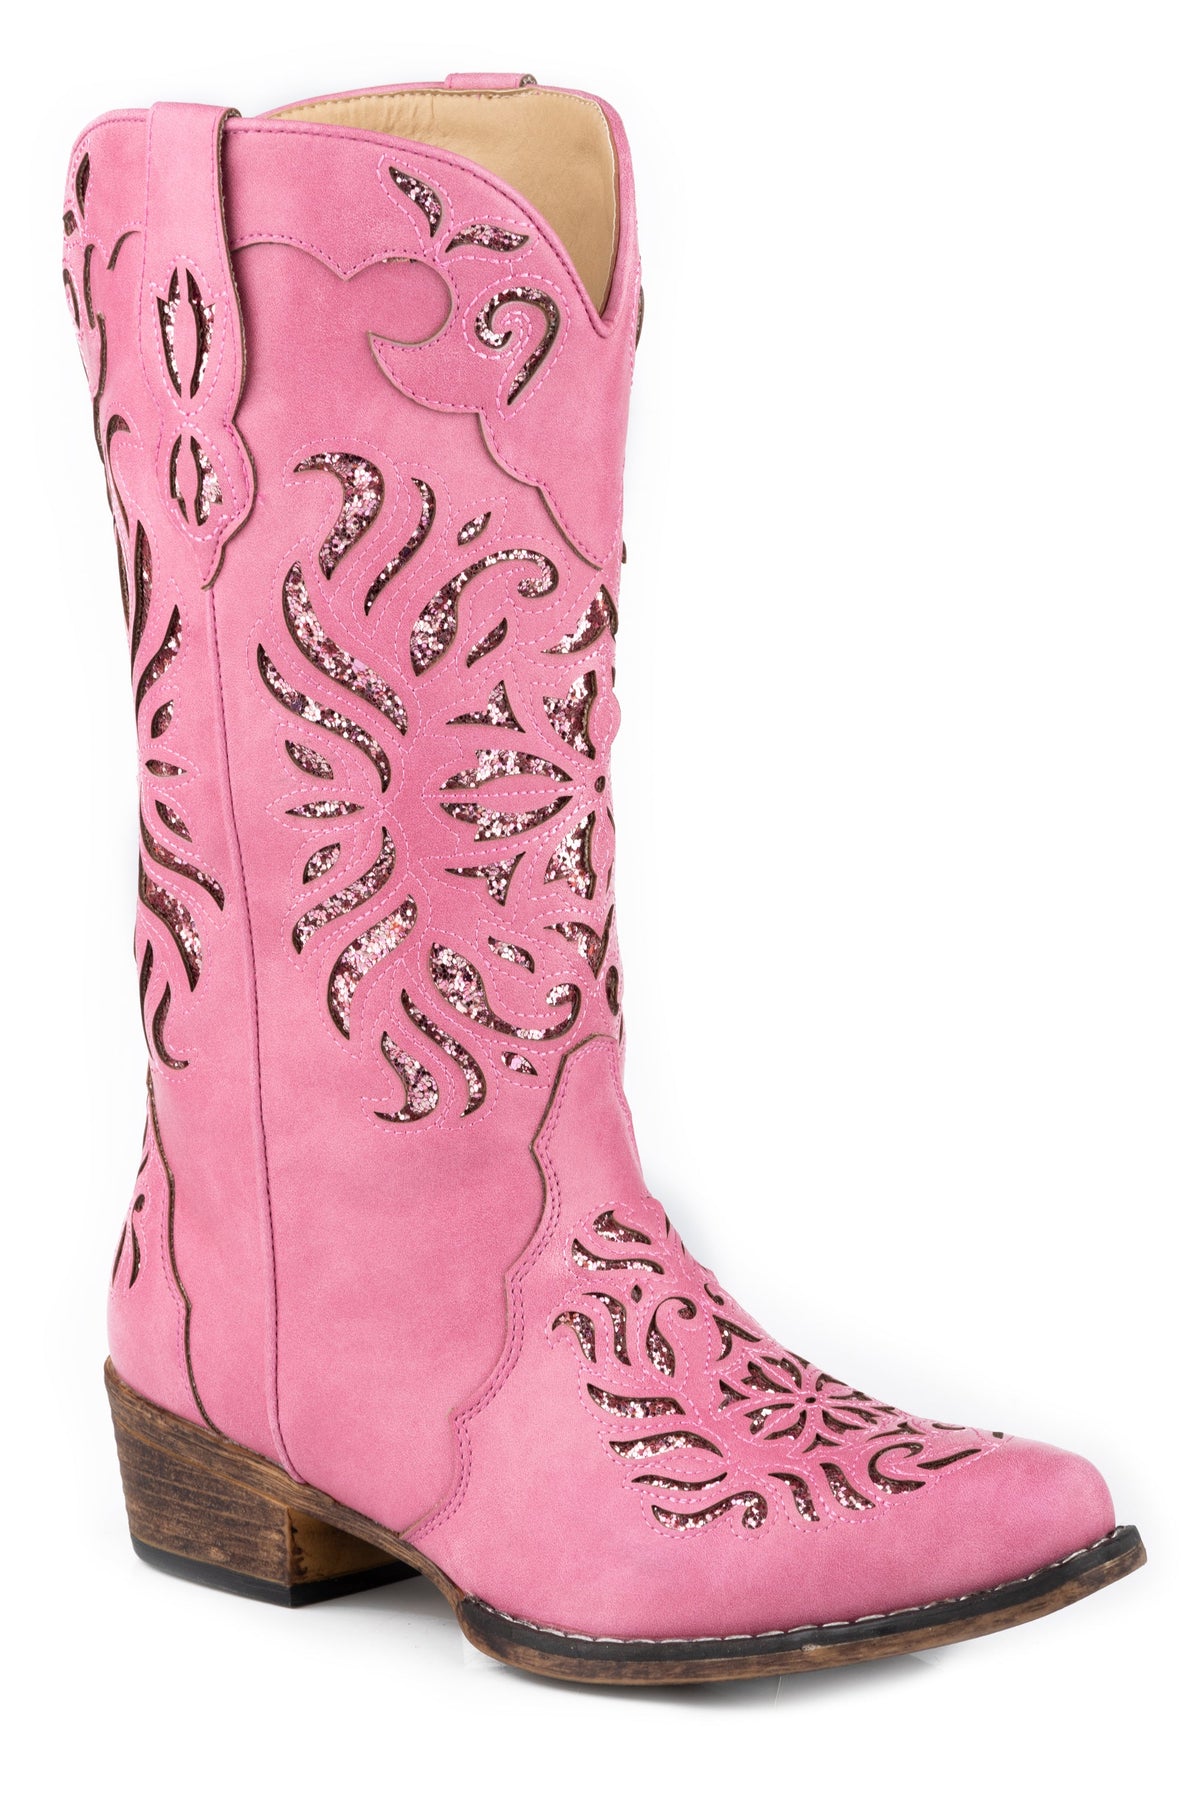 Roper Womens Hot Pink Faux Leather